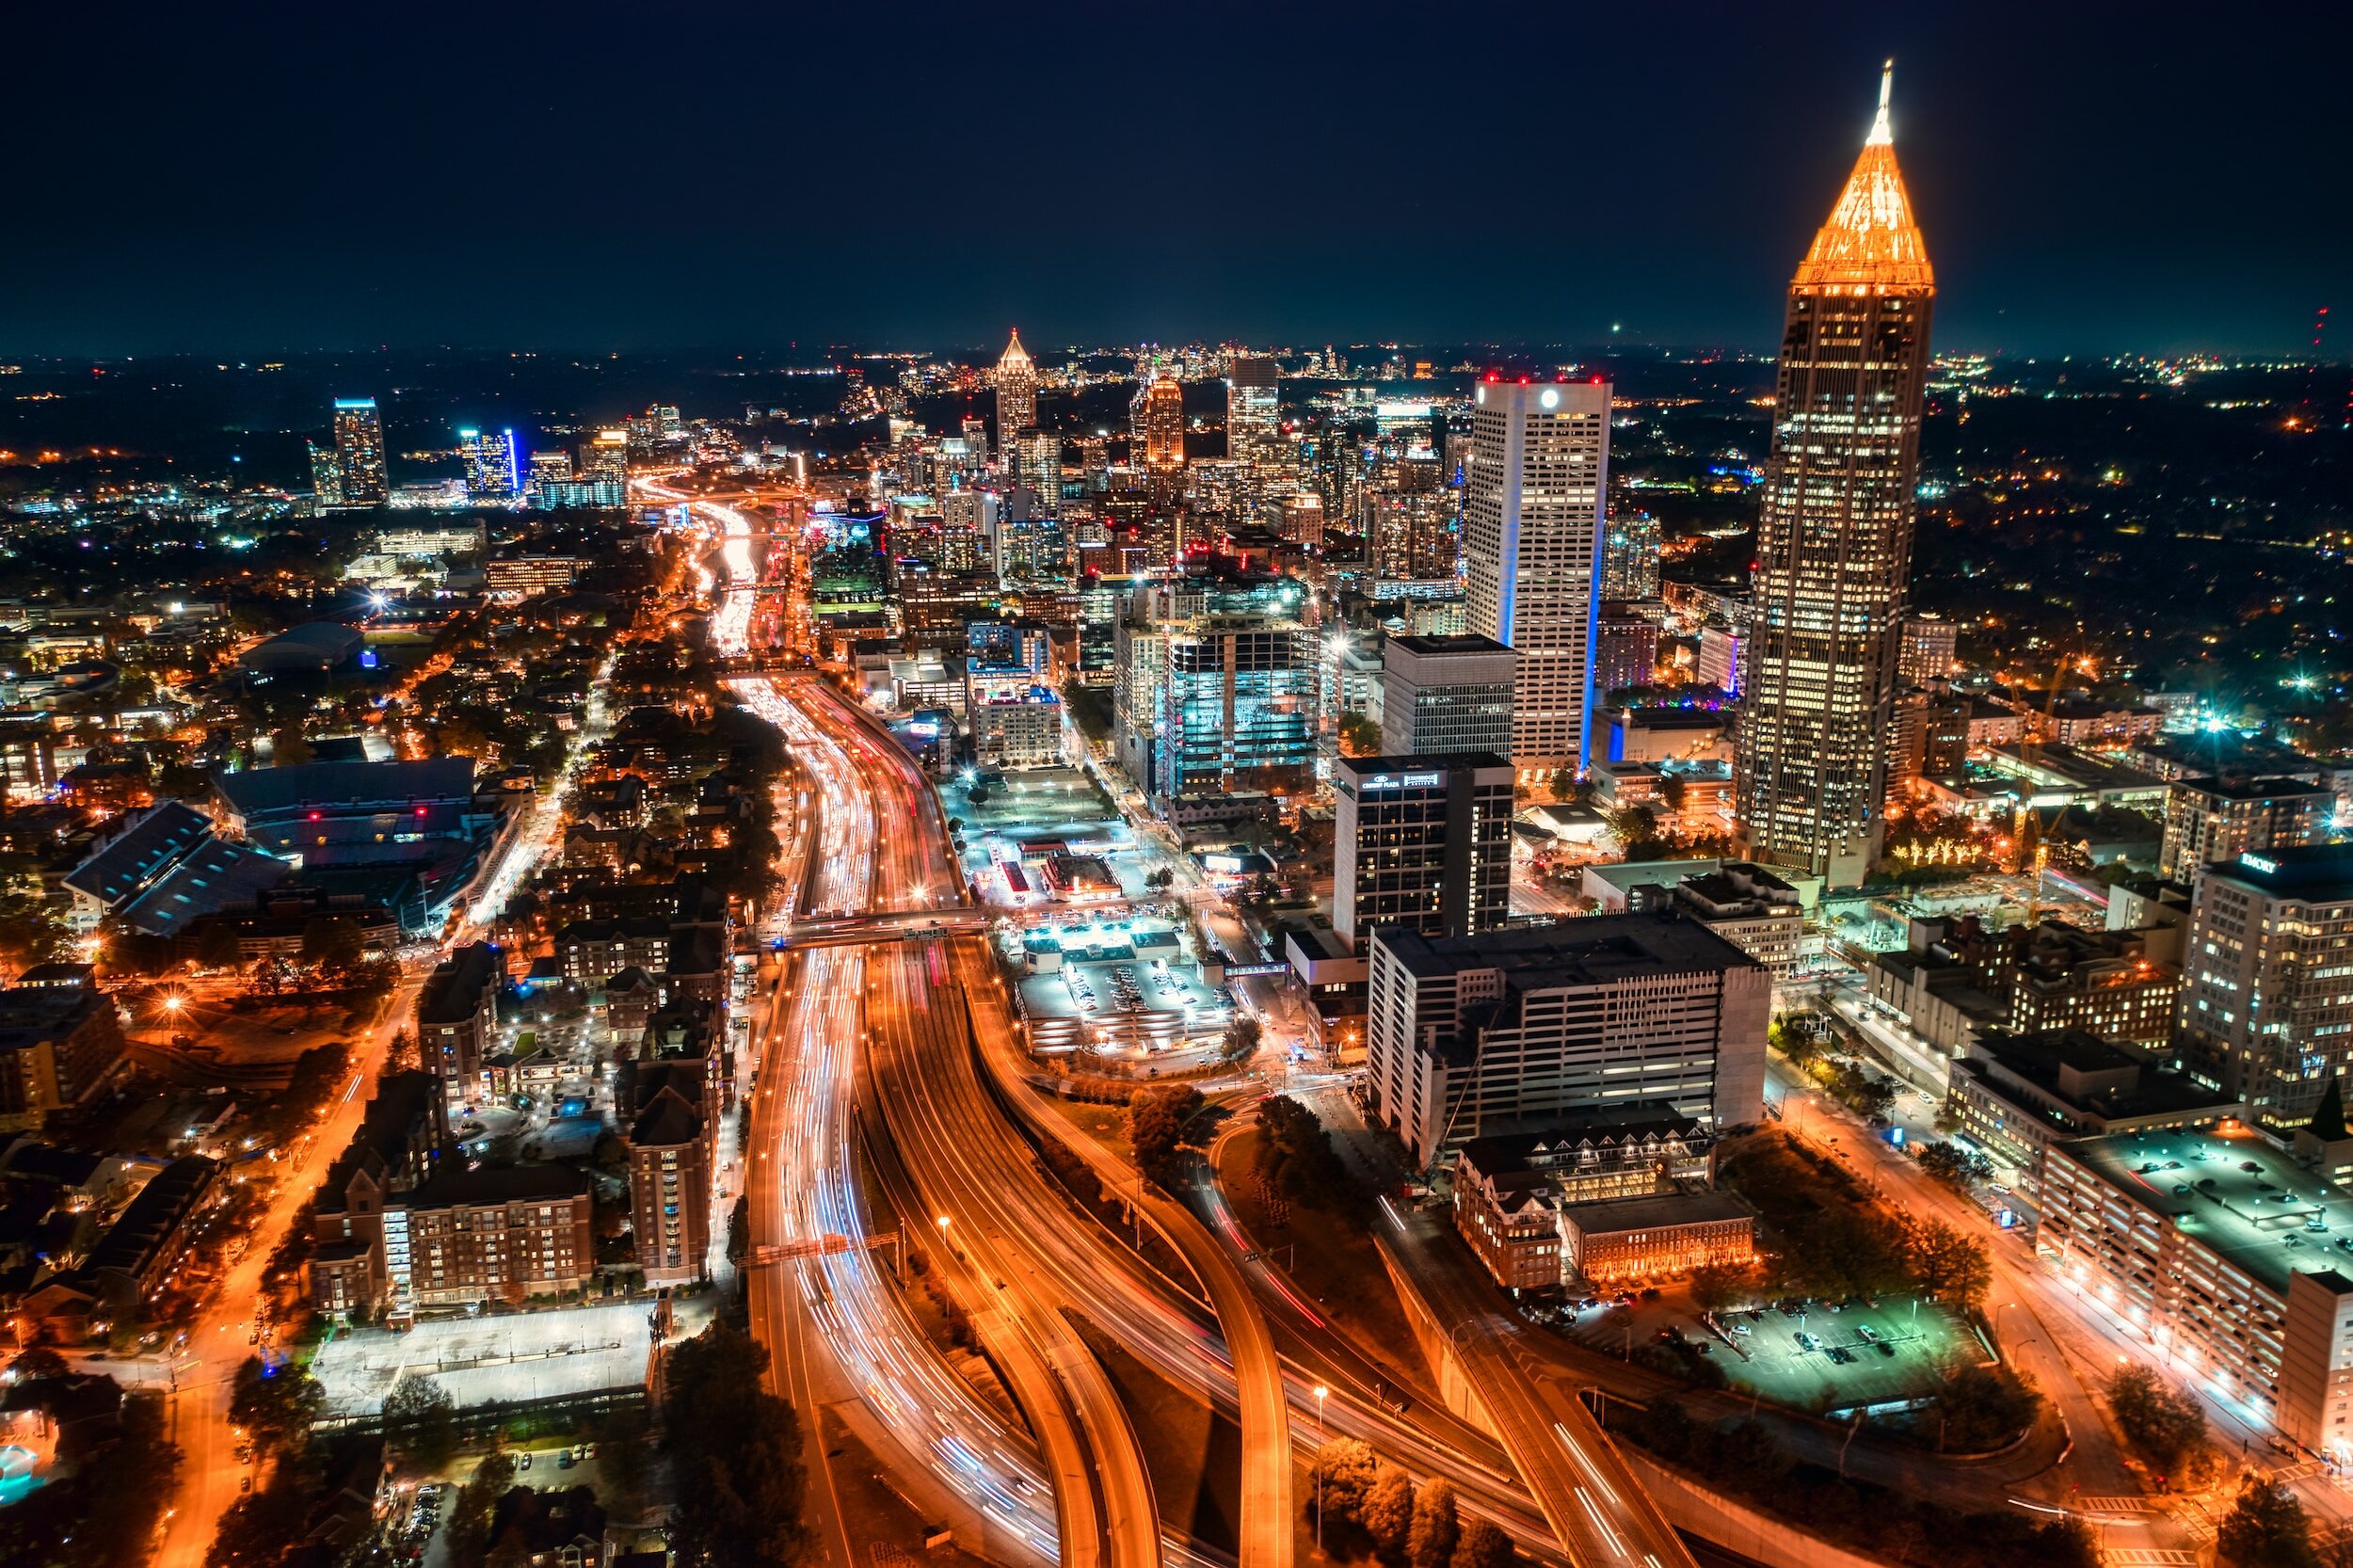 Atlanta Chosen as Home for New Regional Office of the United States Patent and Trademark Office